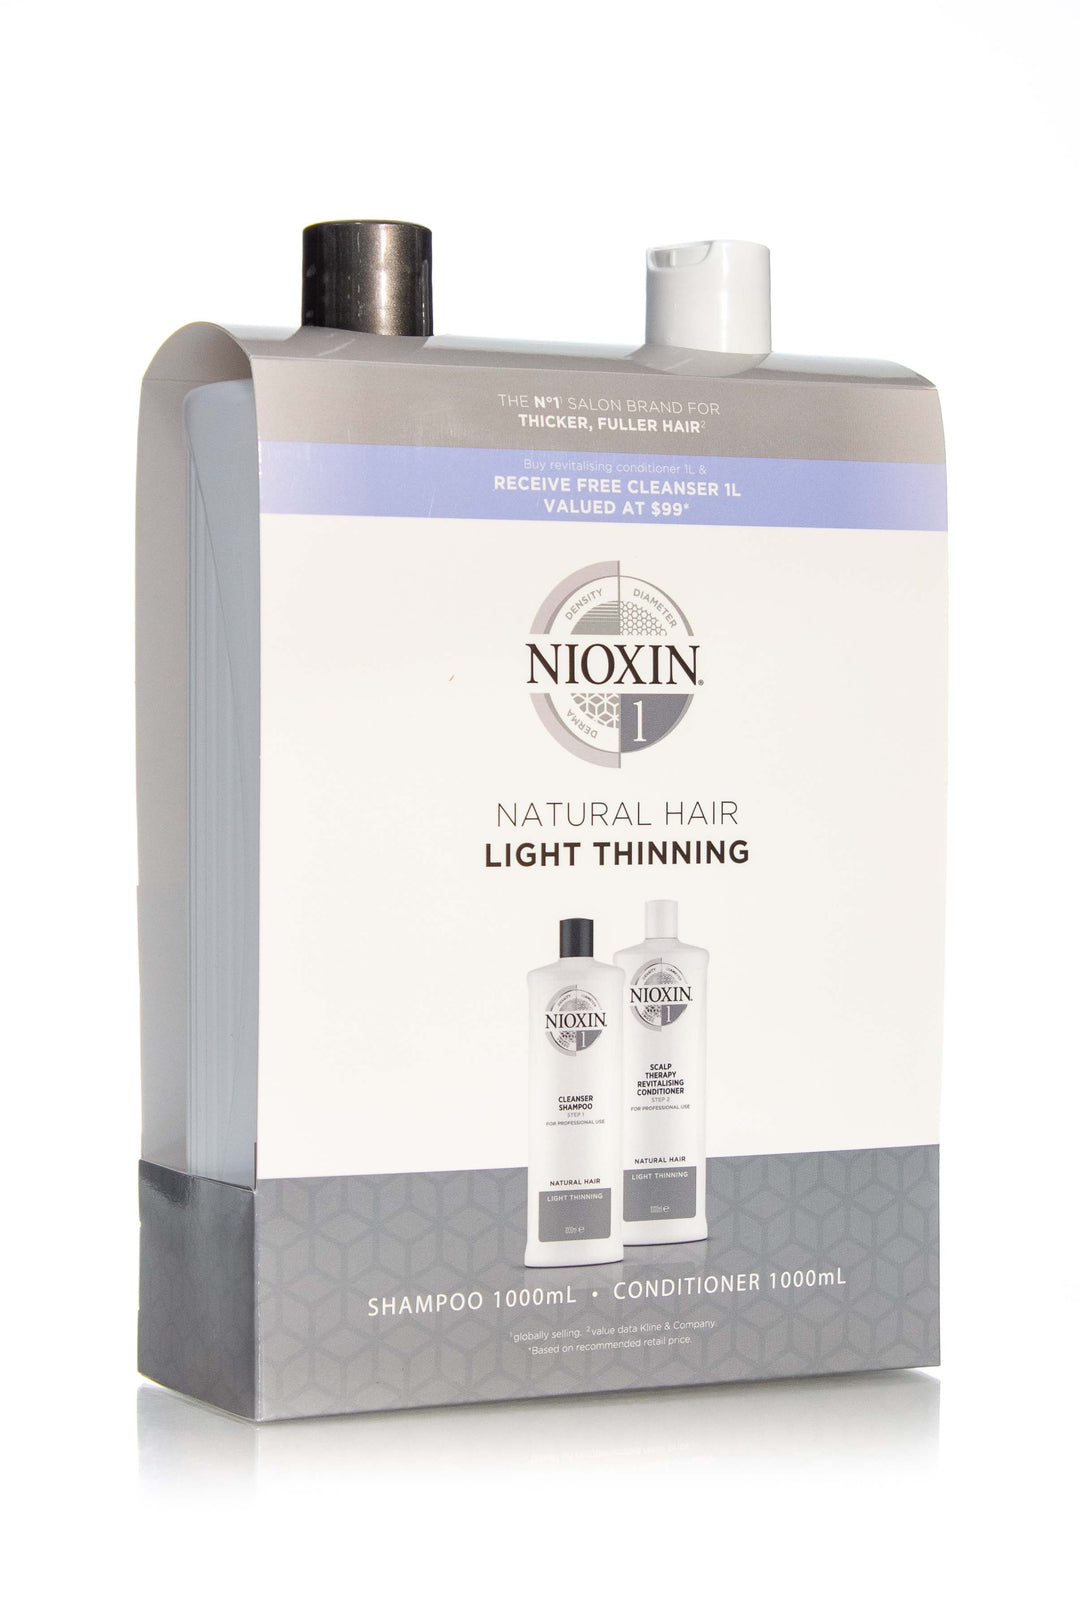 NIOXIN SYSTEM 1 CLEANSER SHAMPOO & SCALP THERAPY REVITALISING CONDITIONER 1L DUO